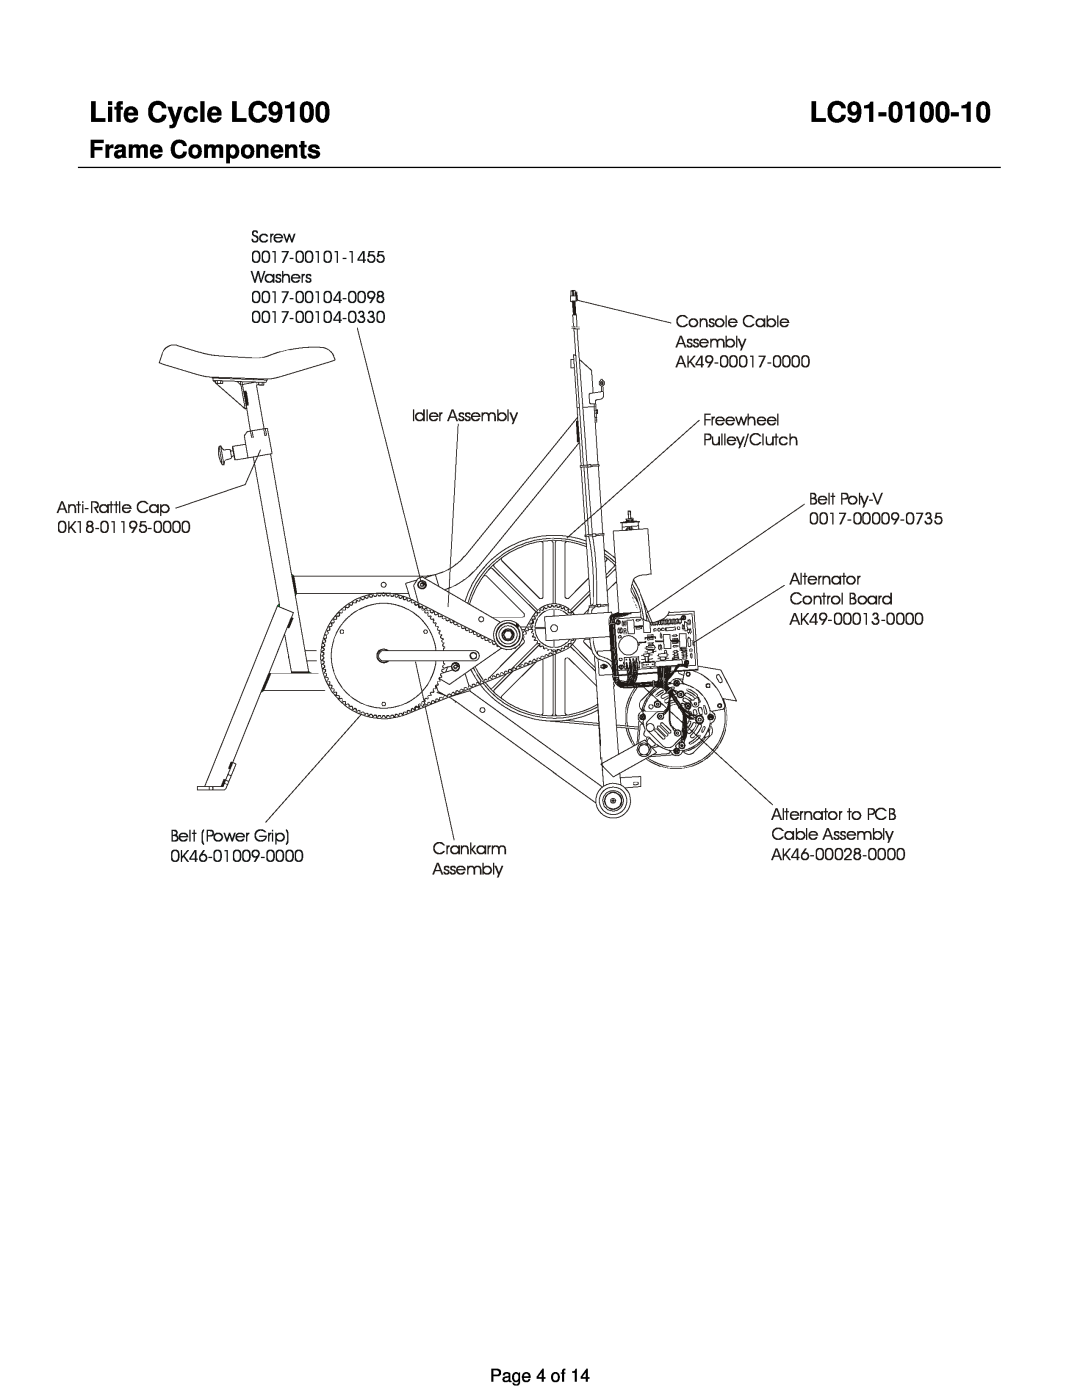 Life Fitness manual Life Cycle LC9100, LC91-0100-10, Frame Components, Screw, 0017-00101-1455, Washers, 0017-00104-0098 